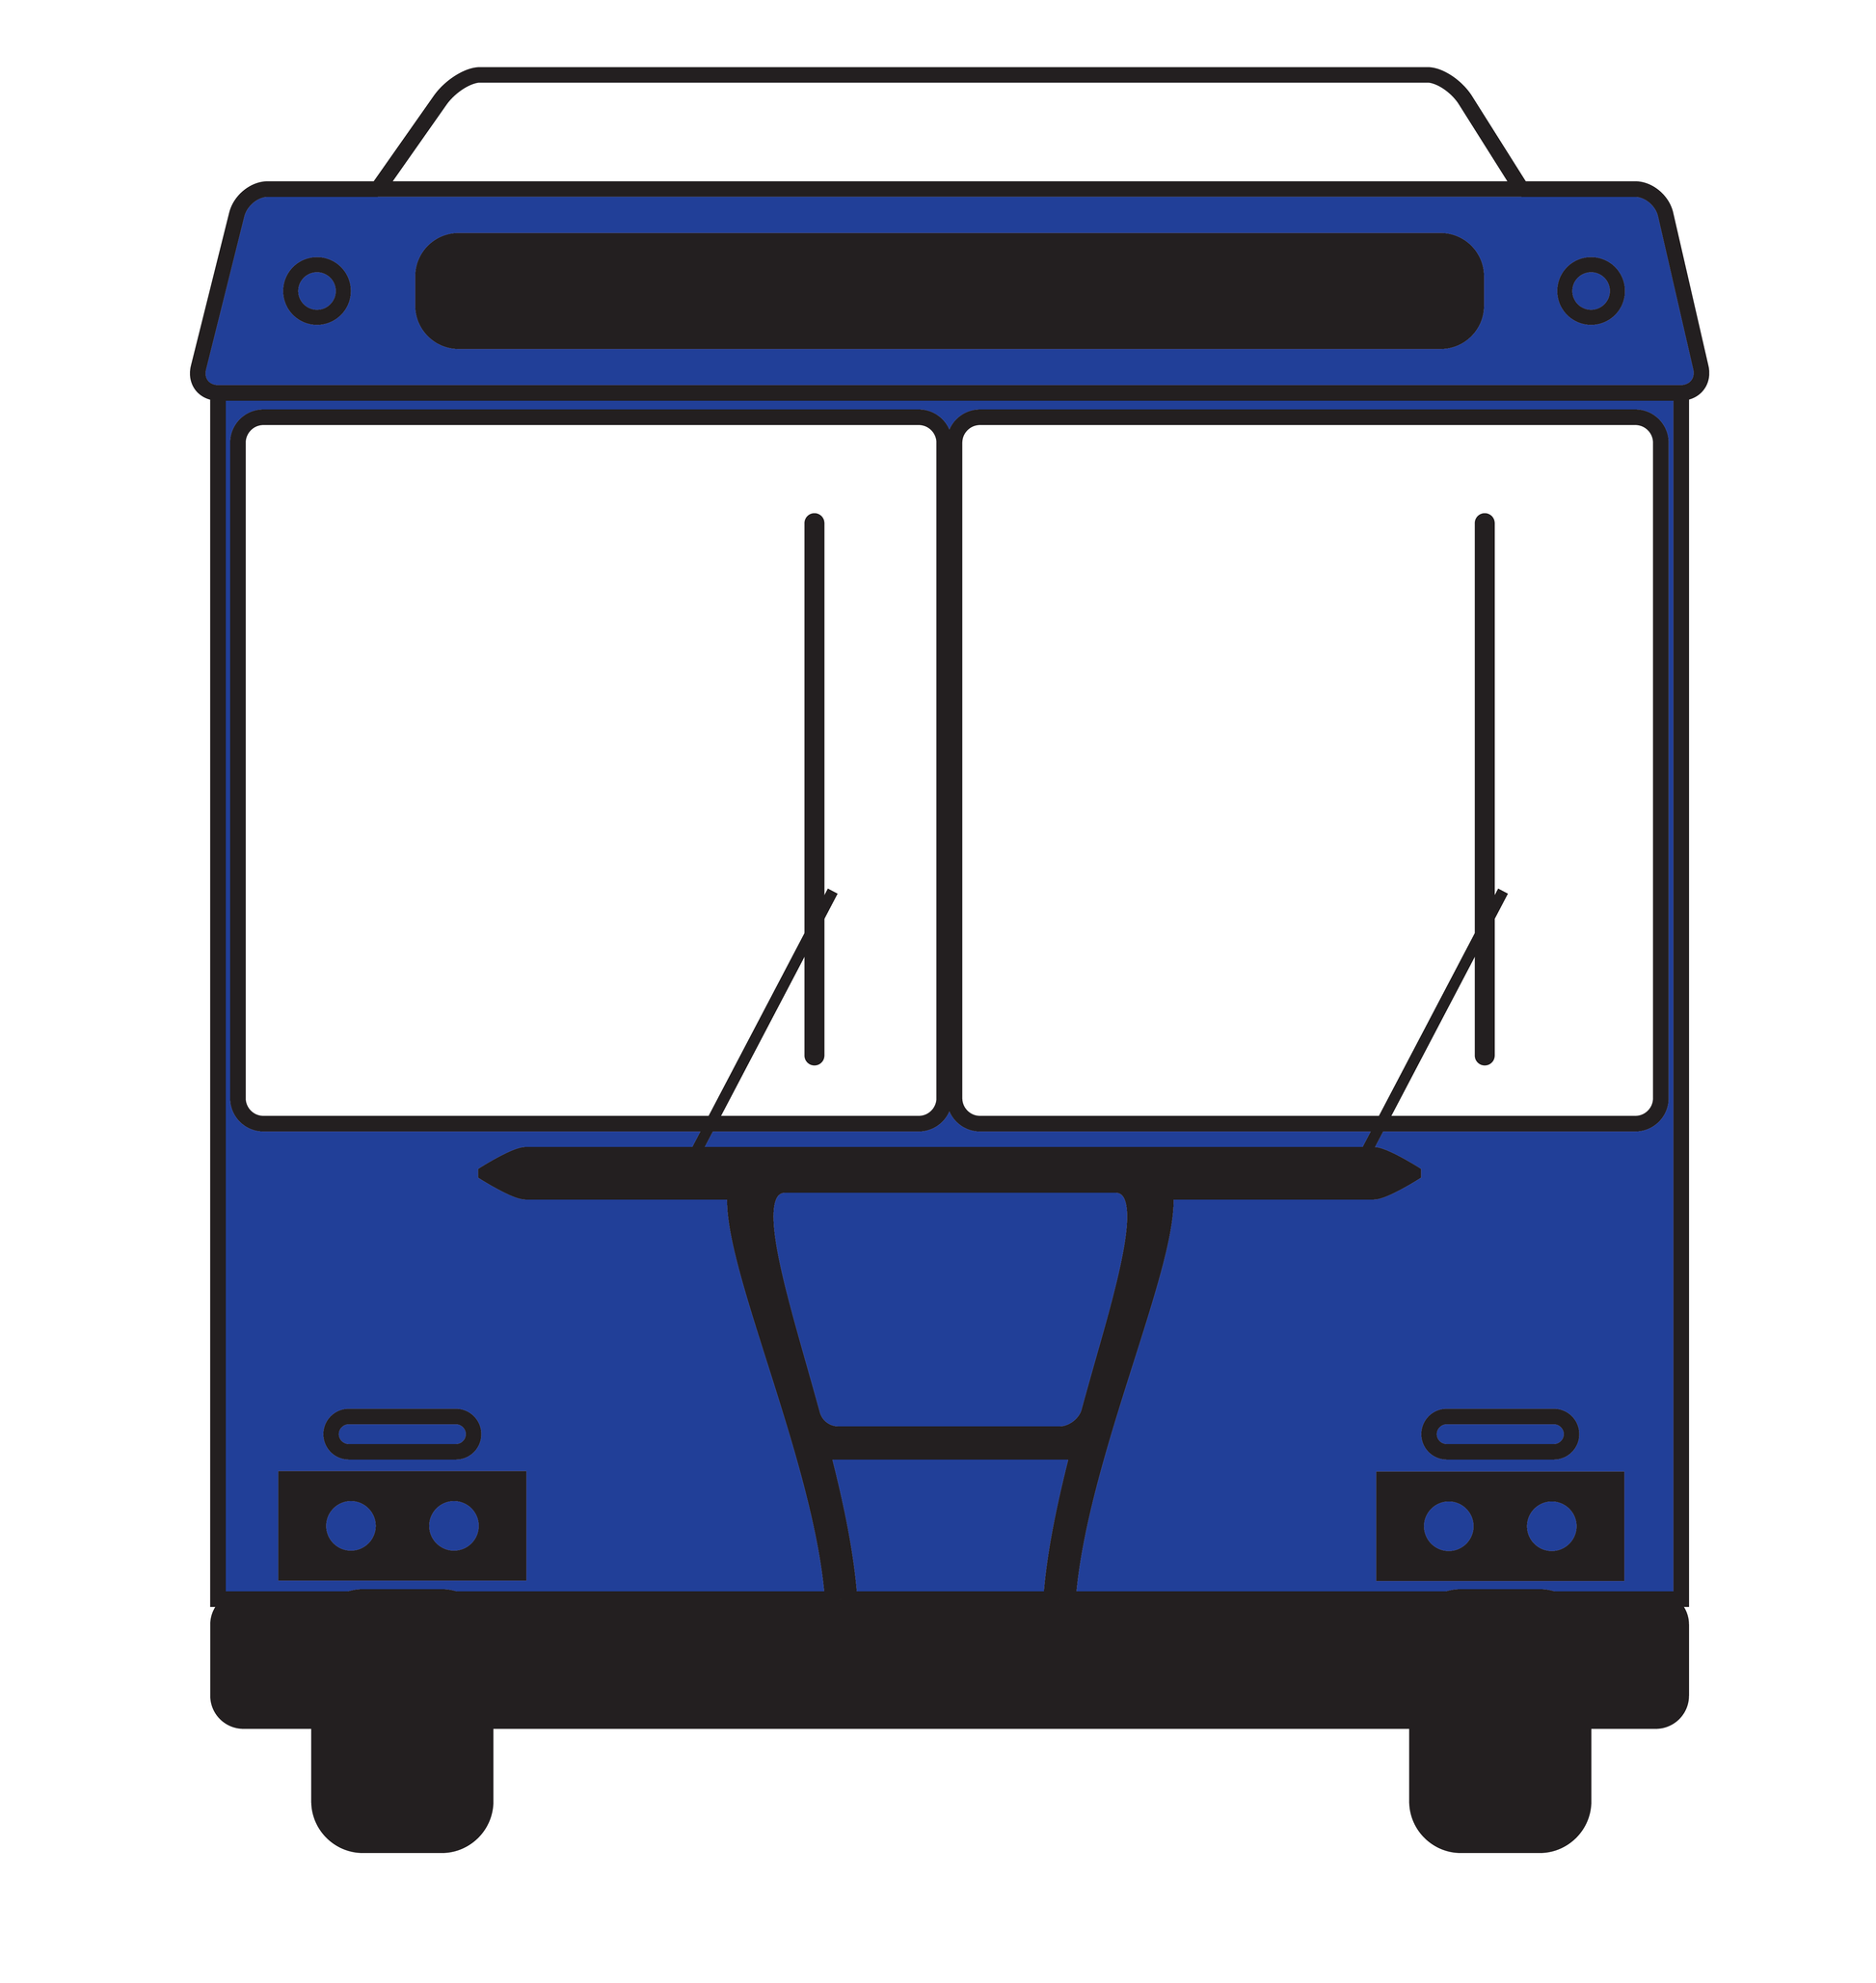 Simplified bus illustration for play card suit.